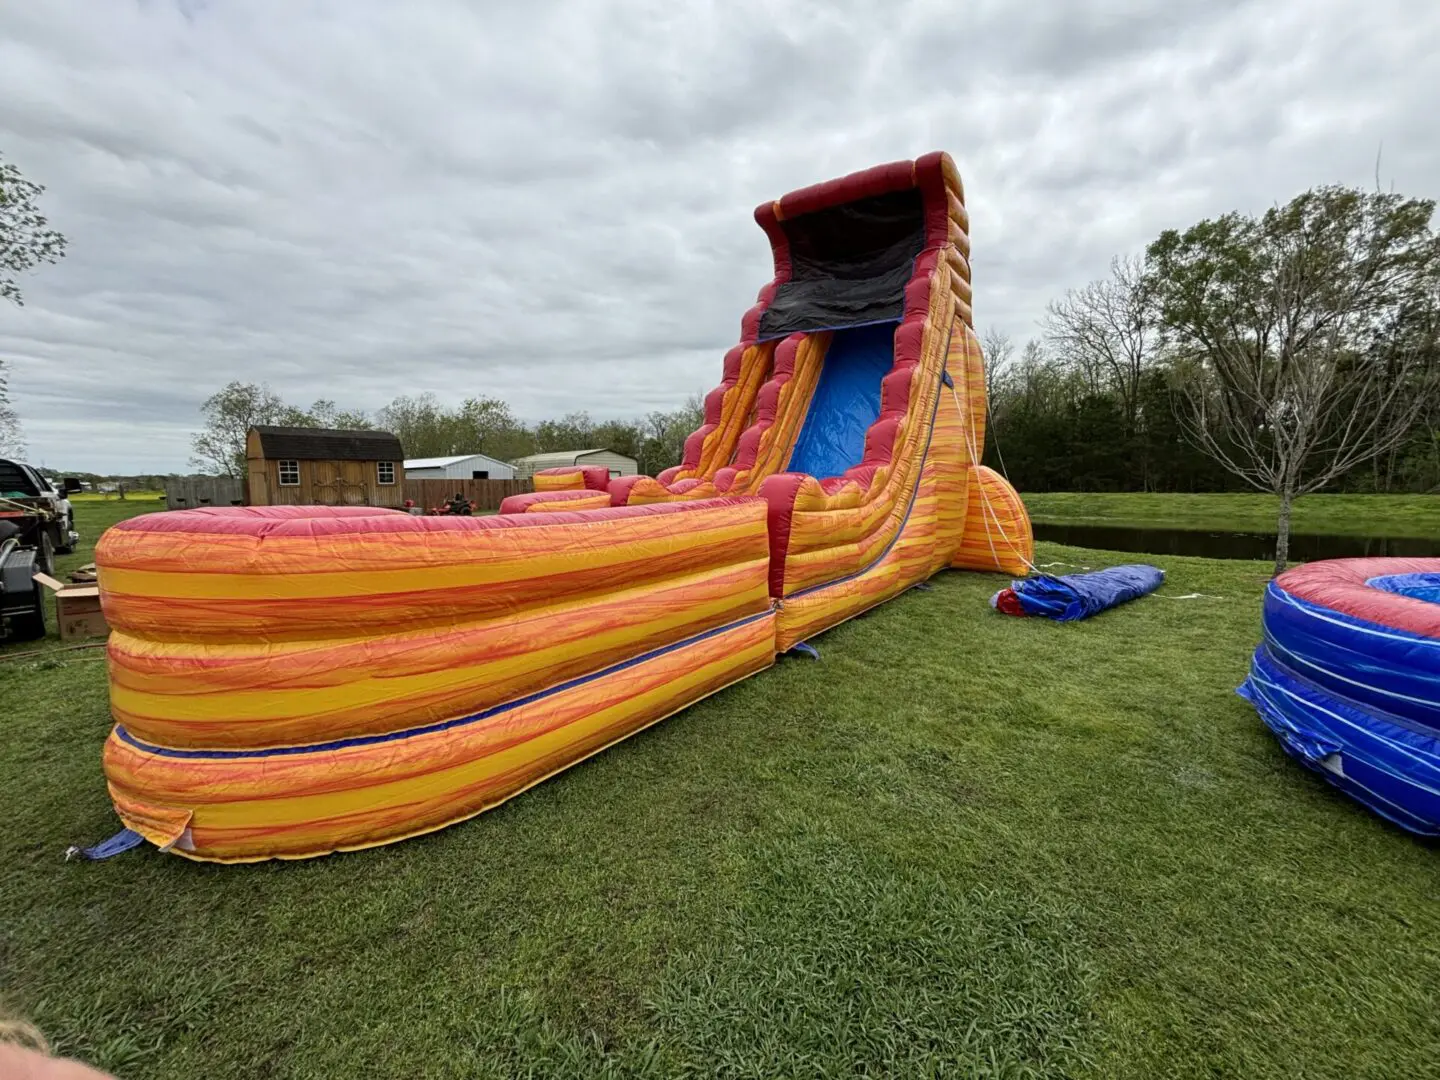 A large inflatable slide in the grass.